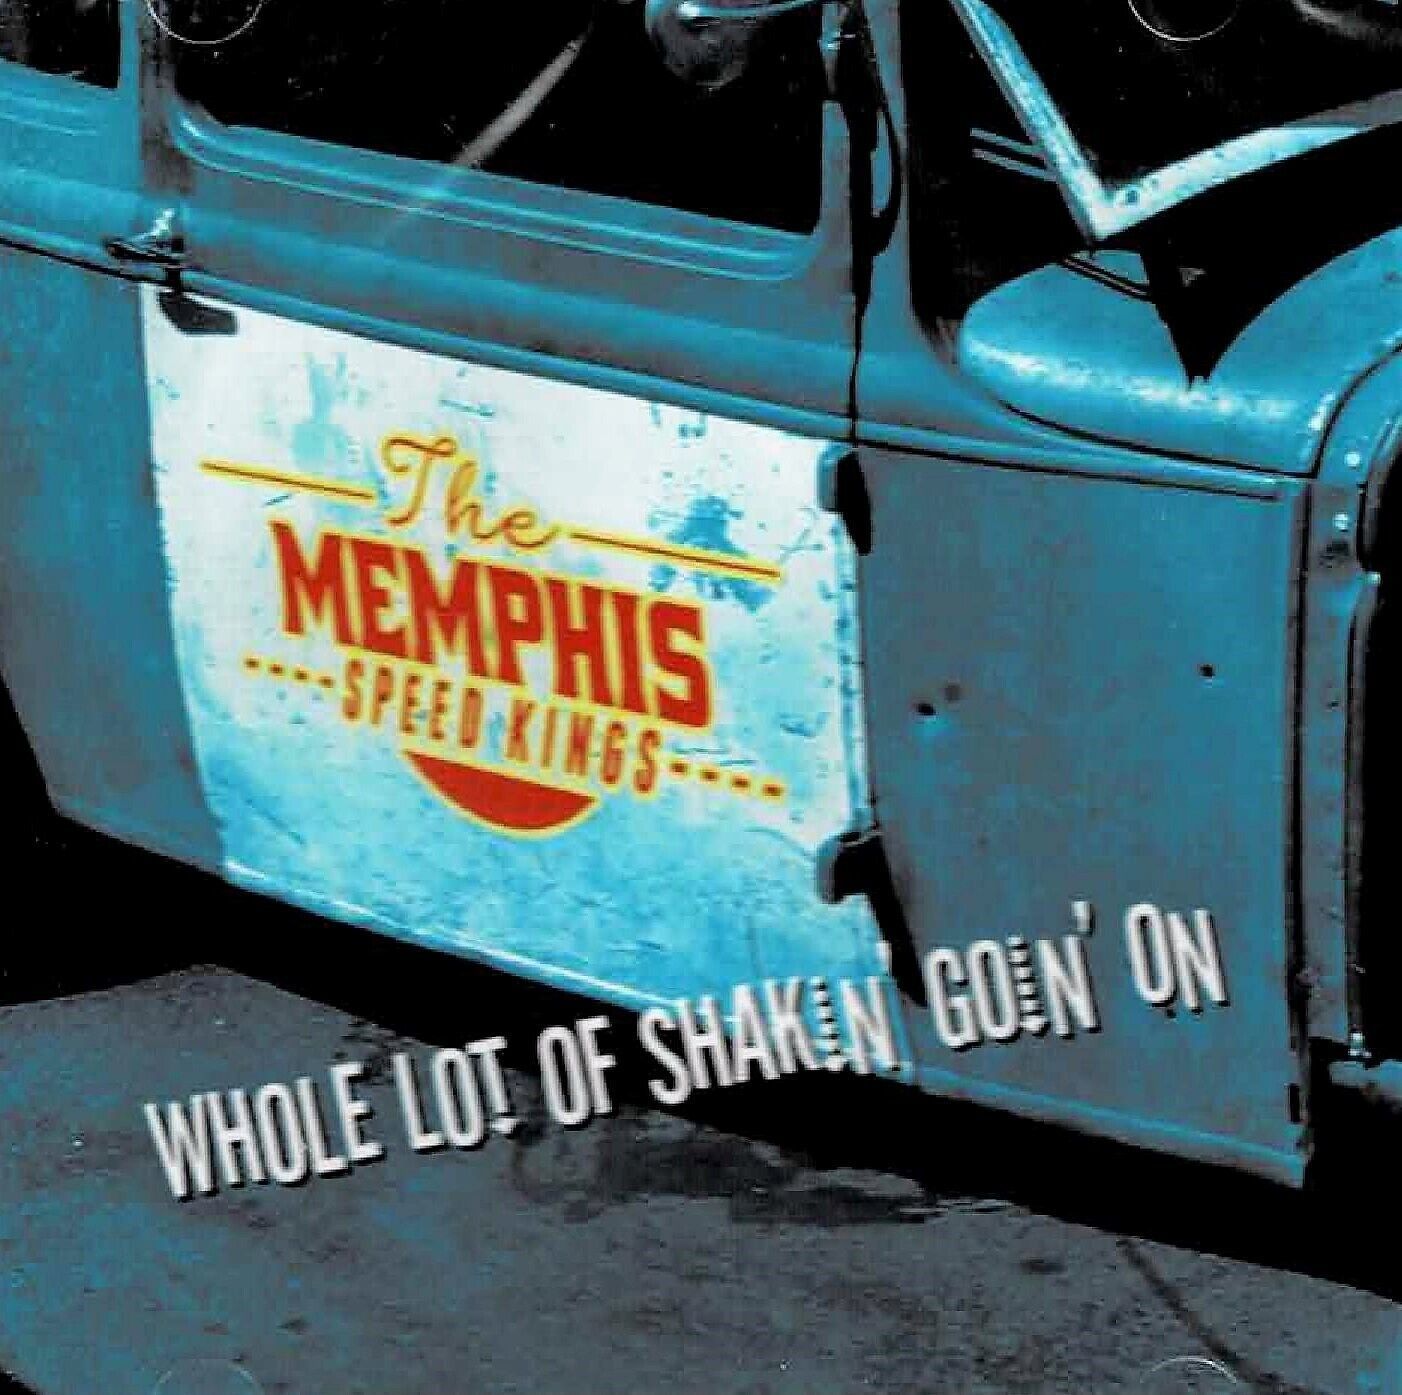 Primary image for Whole Lot of Shakin' Goin' On by The Memphis Speed Kings (CD - 2012) New Sealed